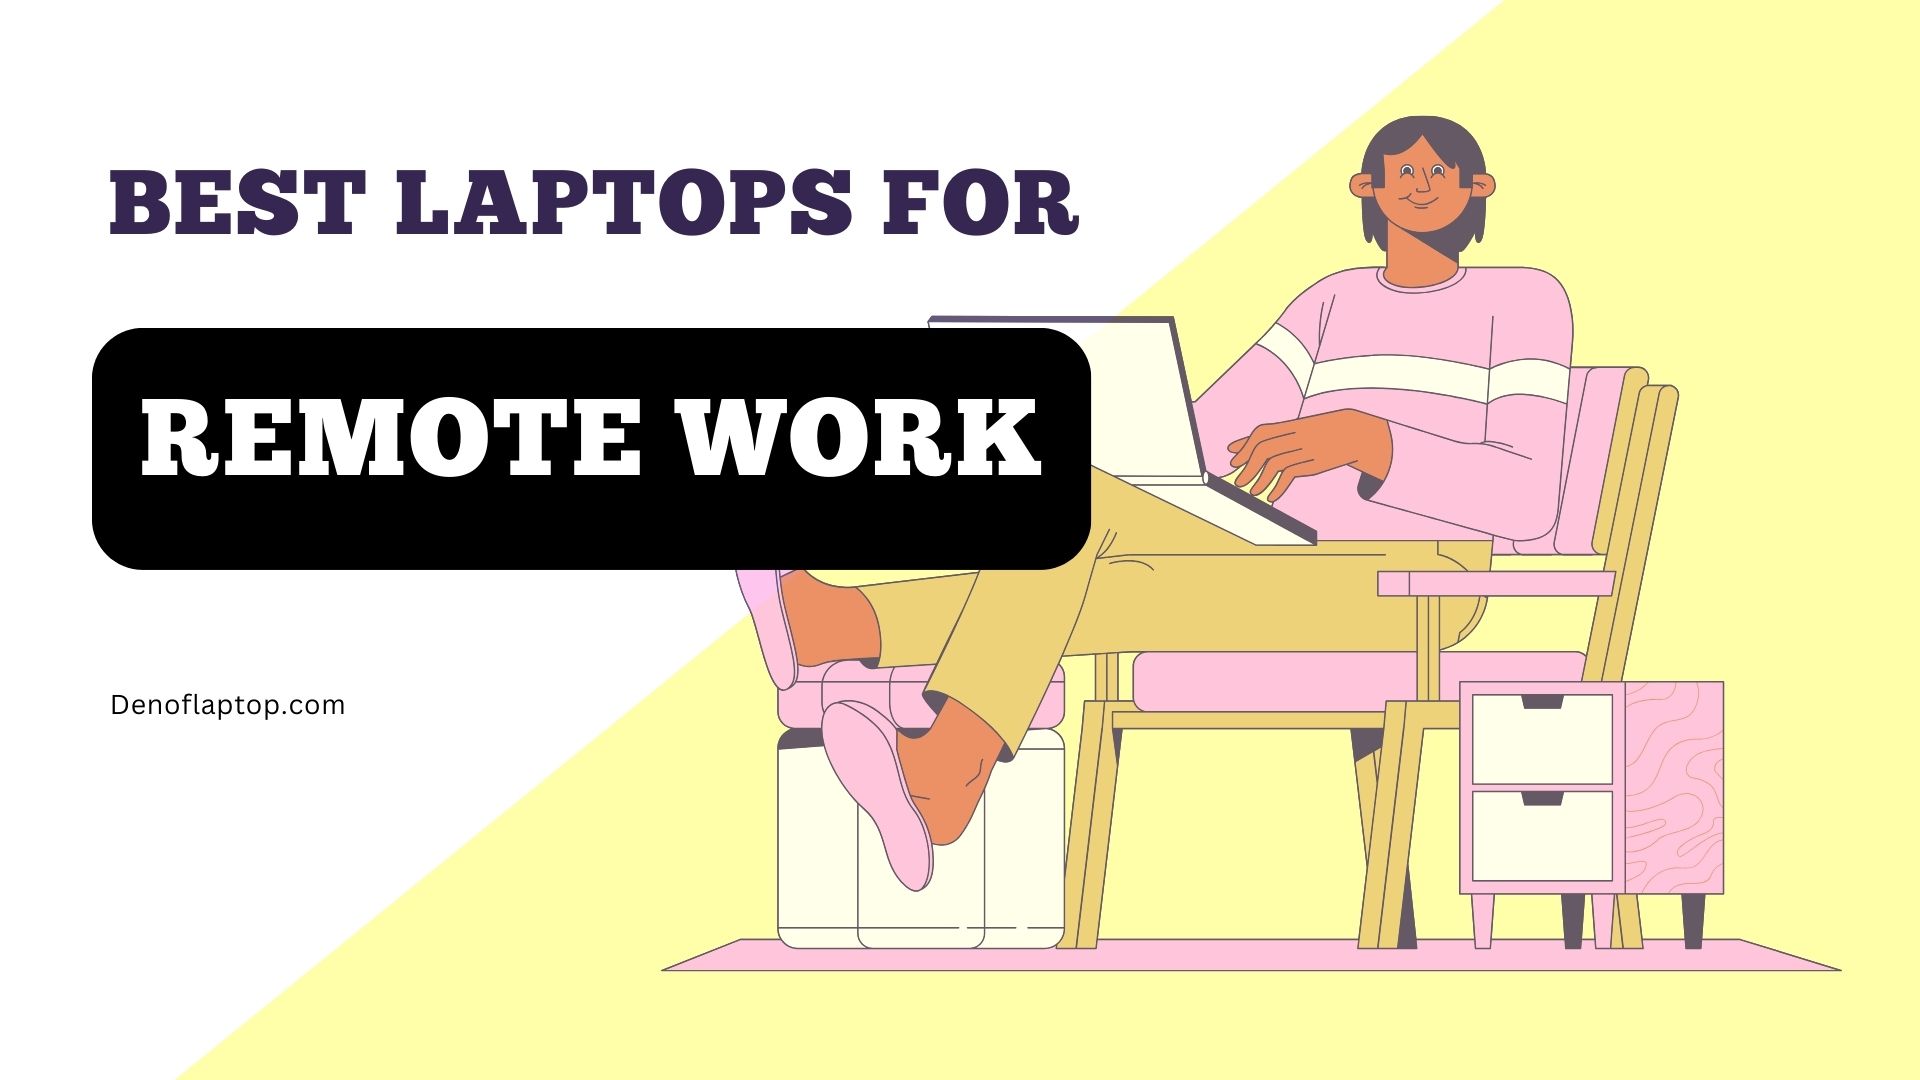 Best Laptops for Remote Work